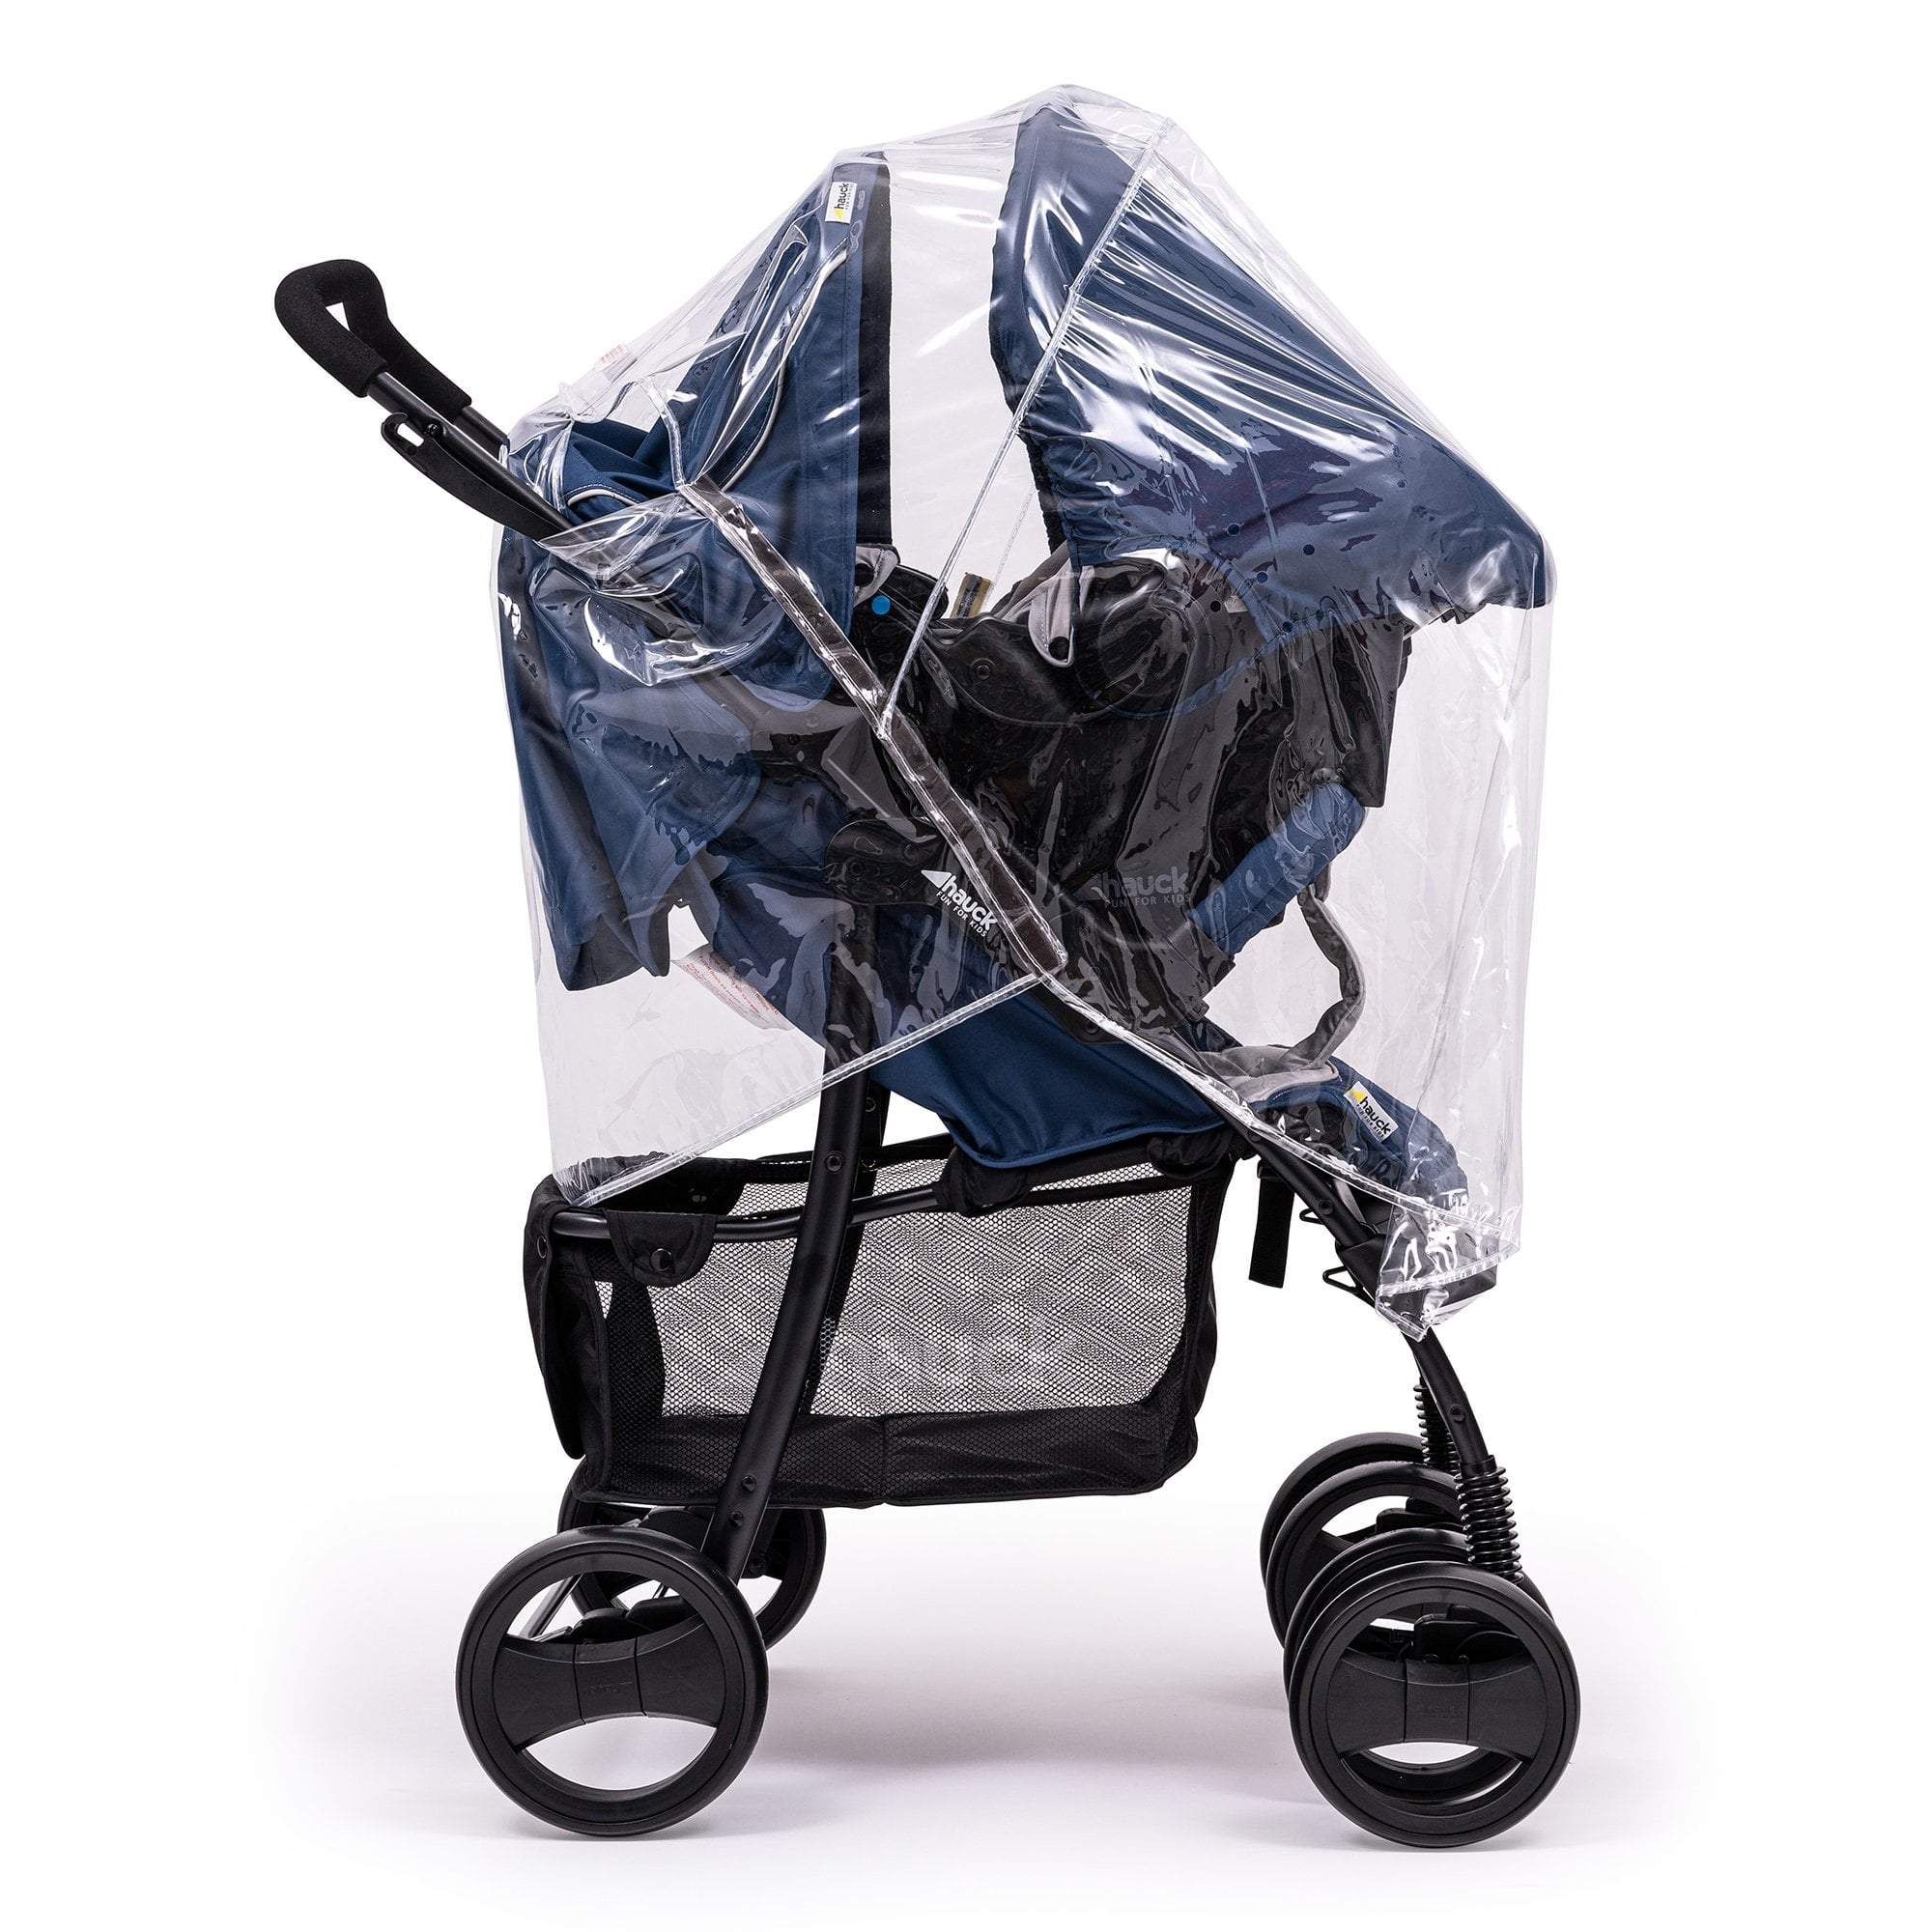 Travel System Raincover Compatible with Gesslein - Fits All Models - For Your Little One